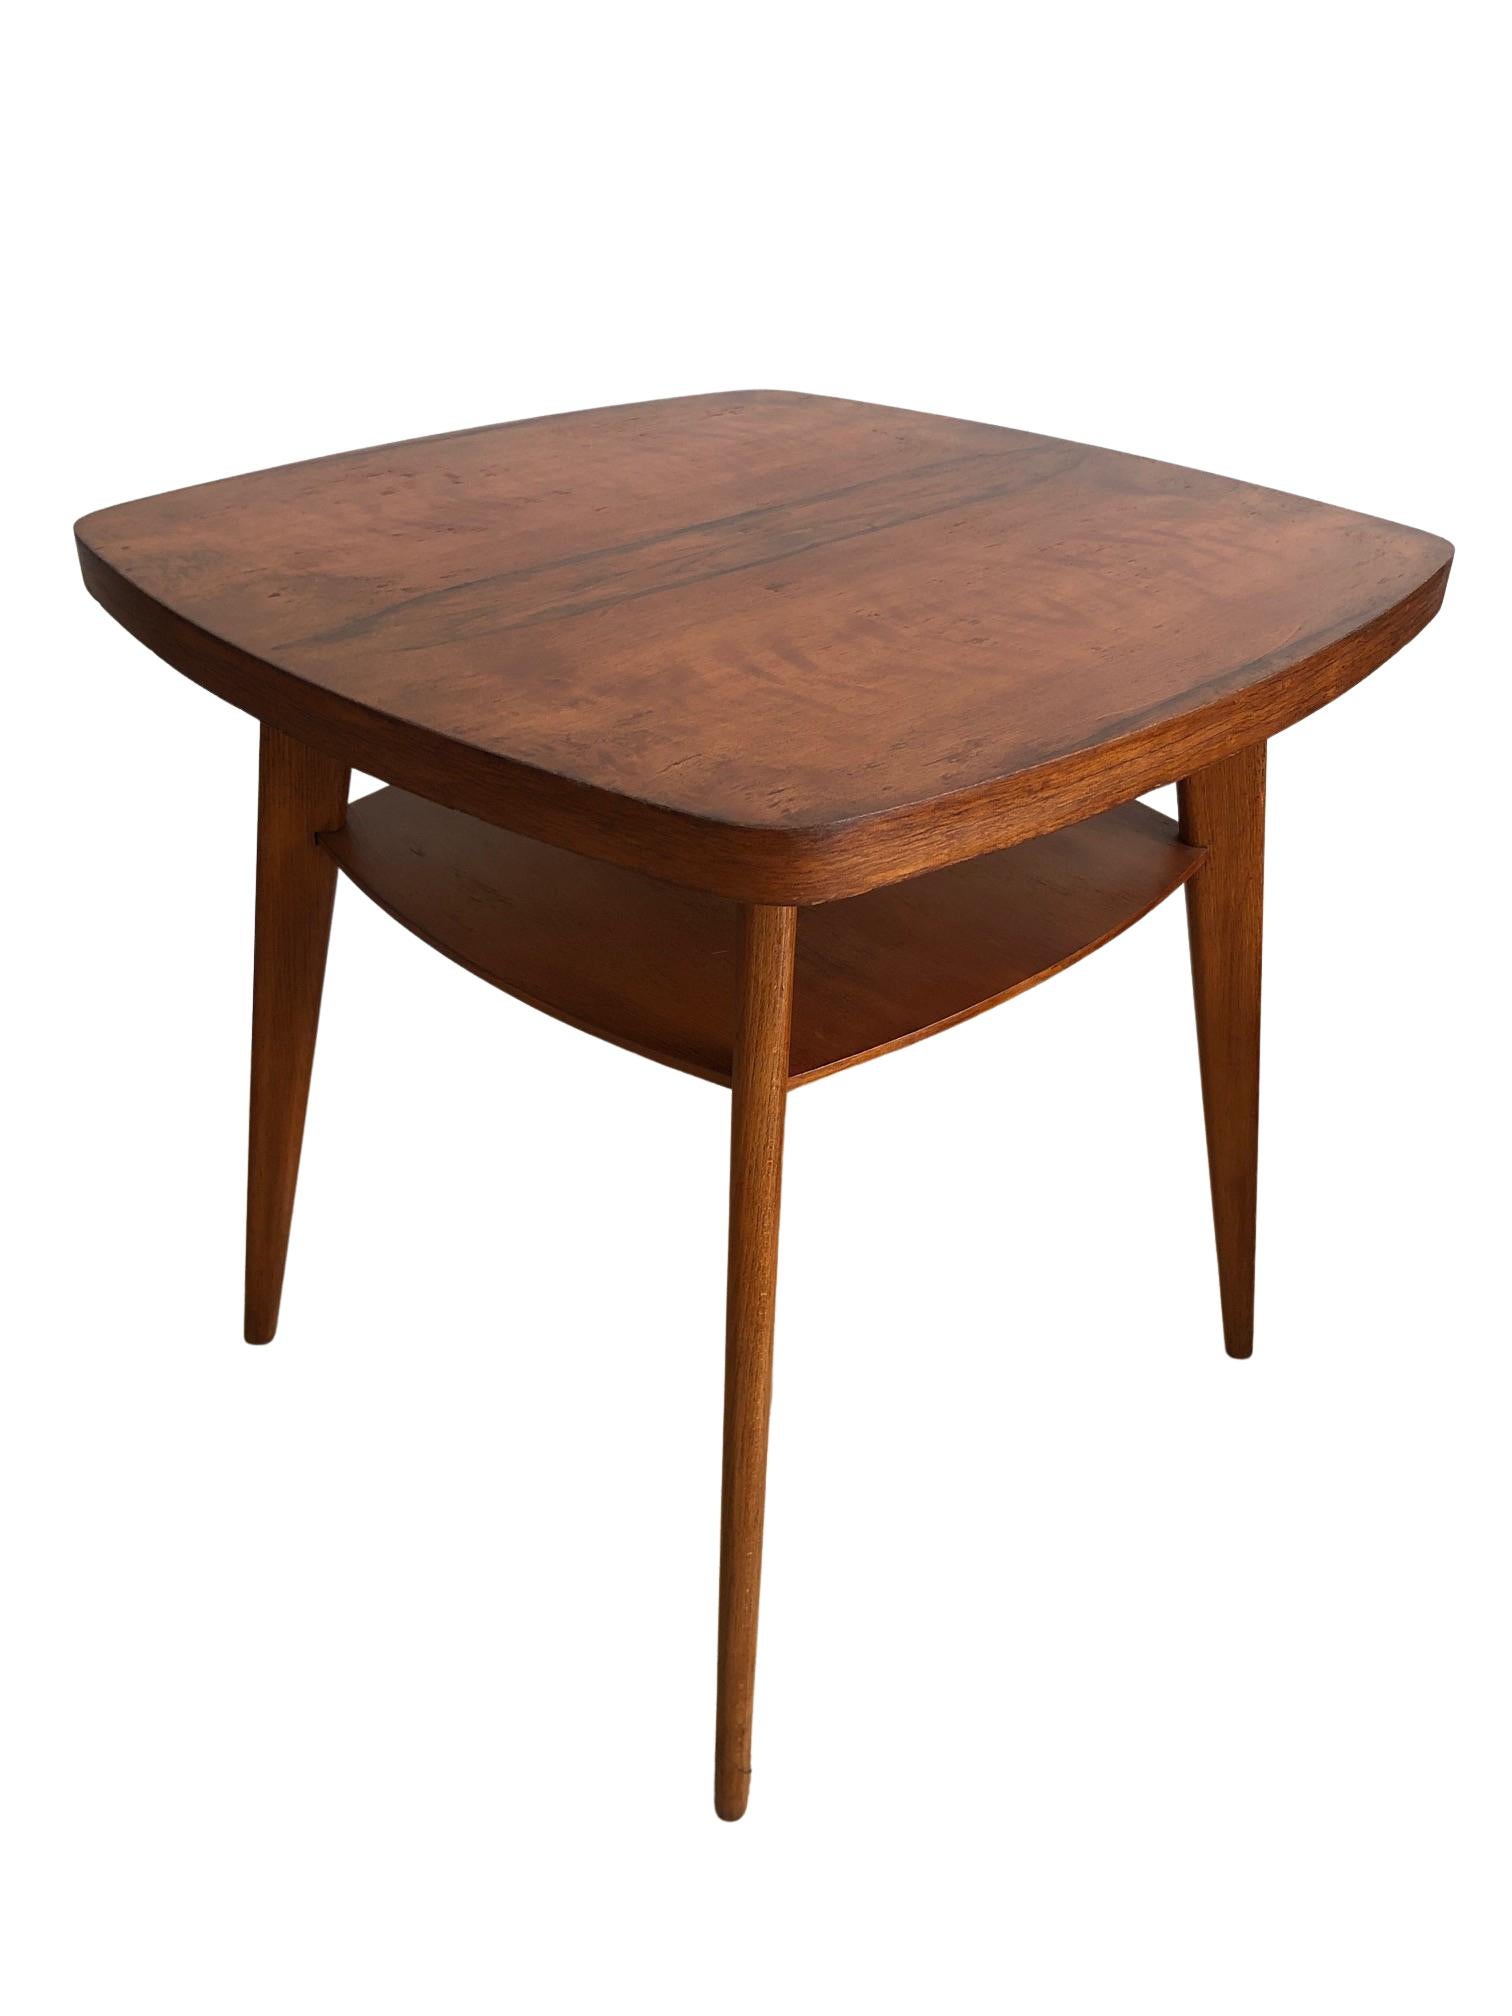 A beautiful wooden coffee table, with a shape typical of the mid-century modern period, a distinctive wood pattern on the table top, which adds charm to this piece of furniture. The table after a complete renovation, the wood was cleaned, the old